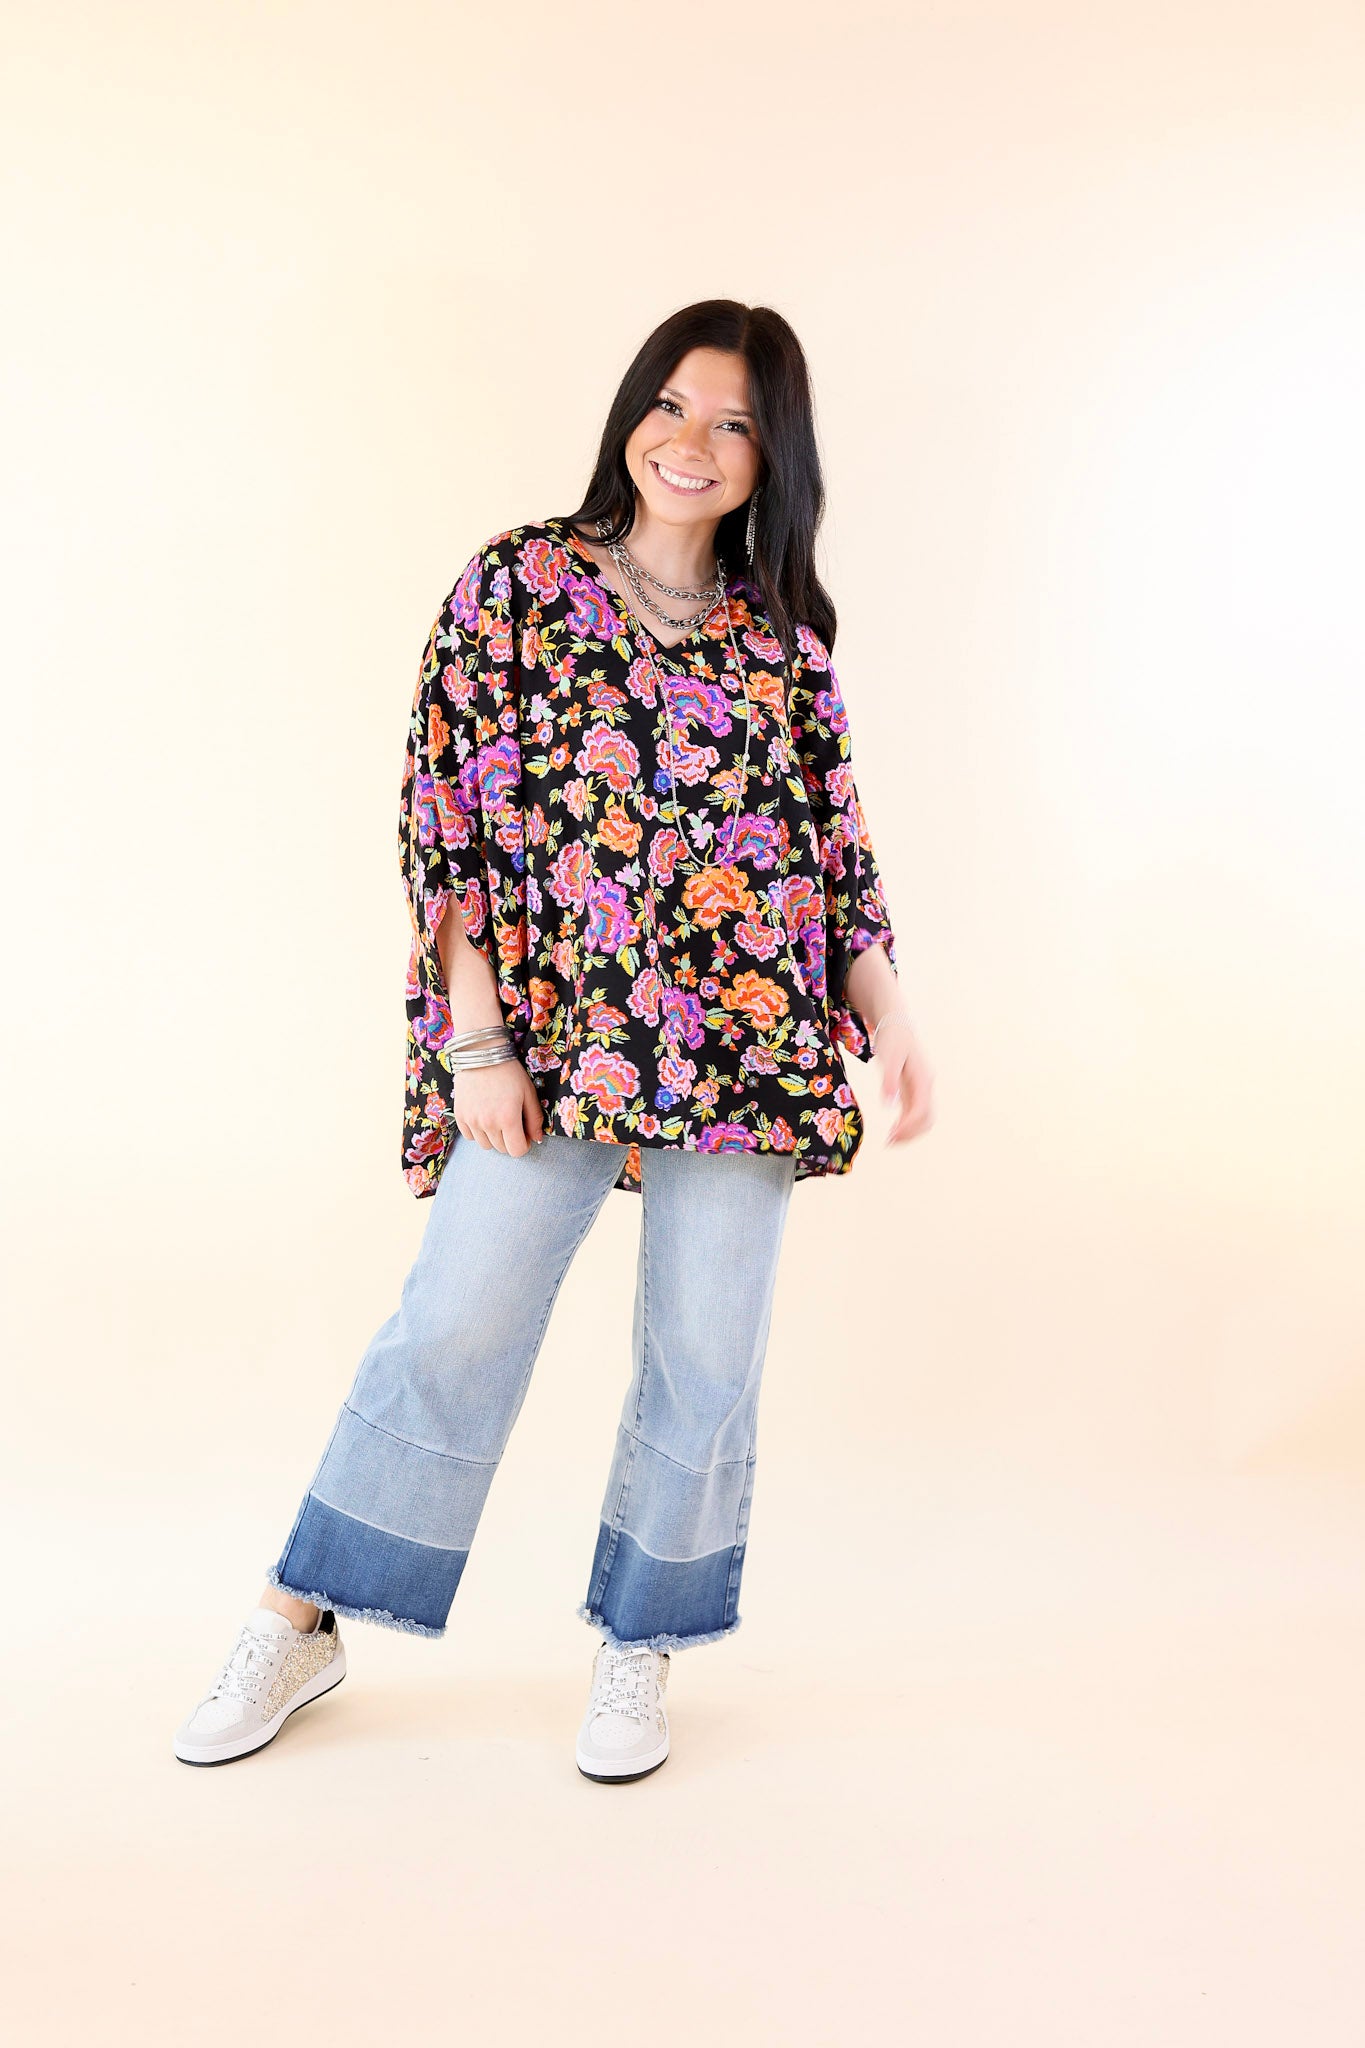 Boho Breeze Floral Print Poncho Top in Black - Giddy Up Glamour Boutique